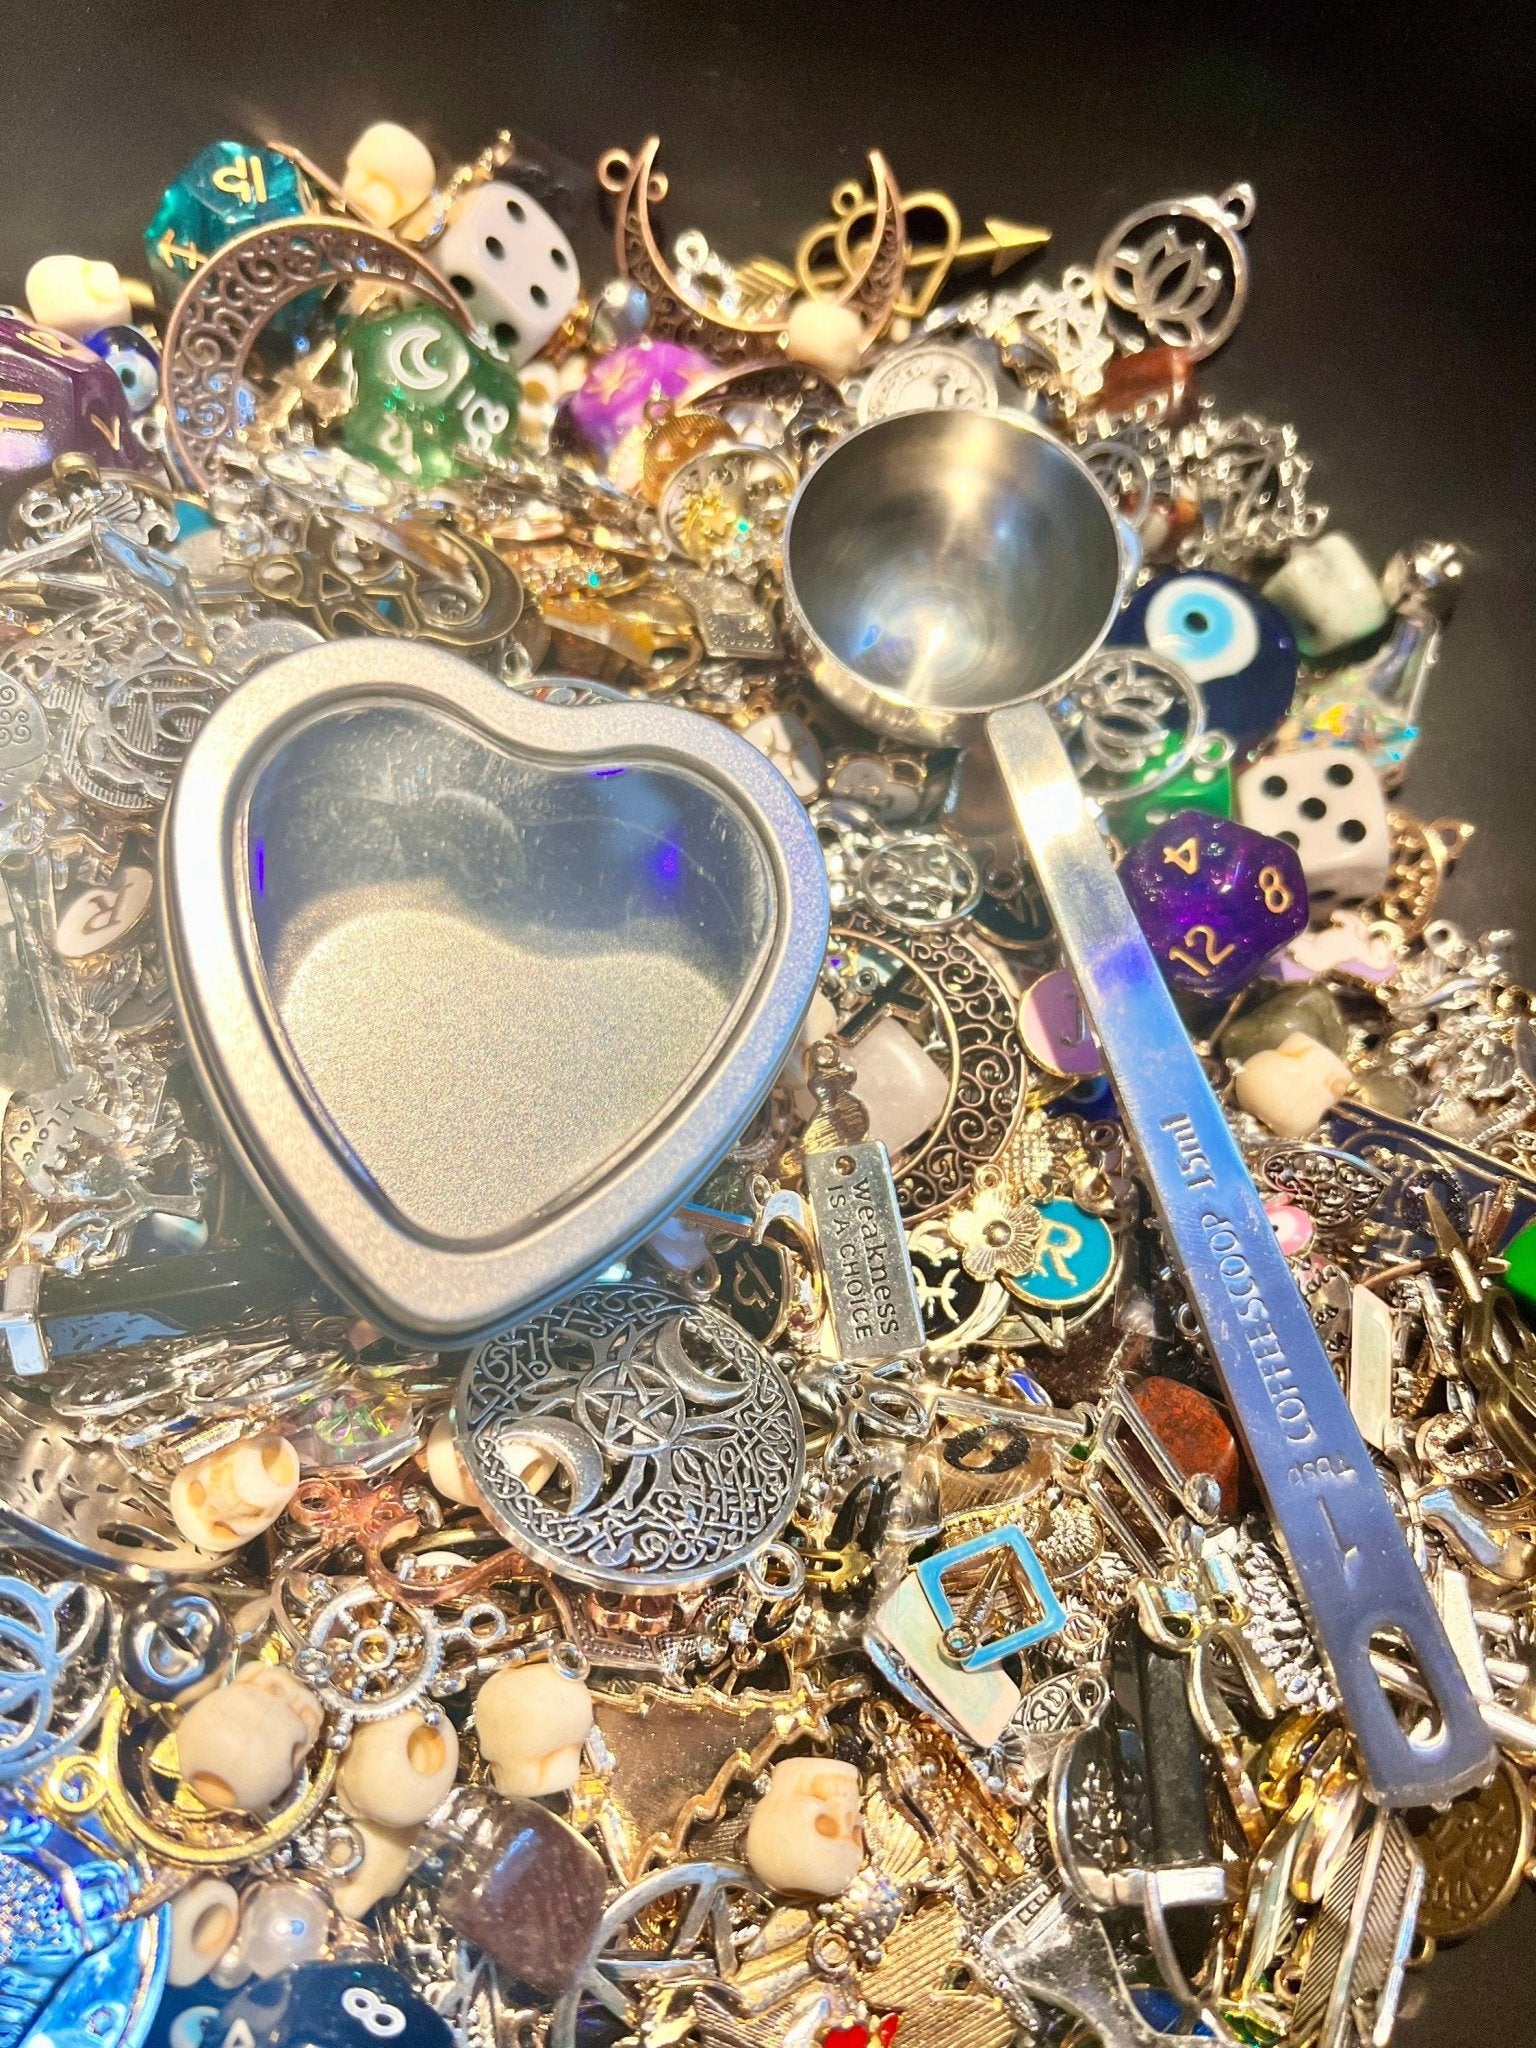 Lucky Dip Charms, Divination Tools, Charm Mystery Scoop, Charm Casting,  Craft Charms, Charm Kit, Divination Charms, Situation Oracle Charms 